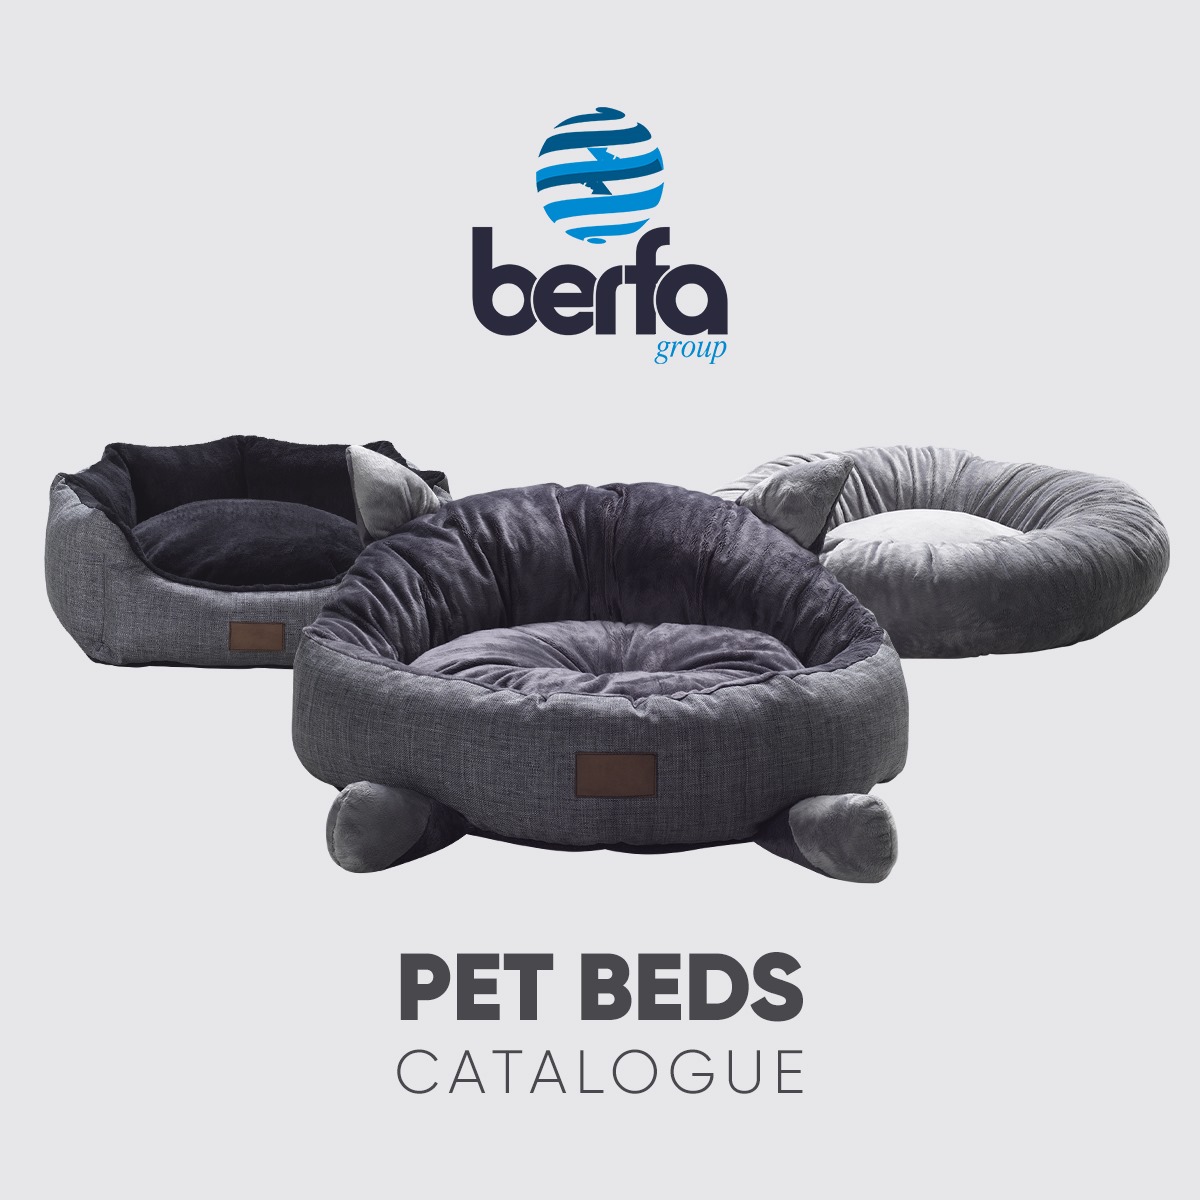 Premium Pet Beds-Comfy and Stylish-Home and Hotel-Different Sizes for Coziness-Pet Mattress-Sofa Style-Couch-Crate-Donut Bed